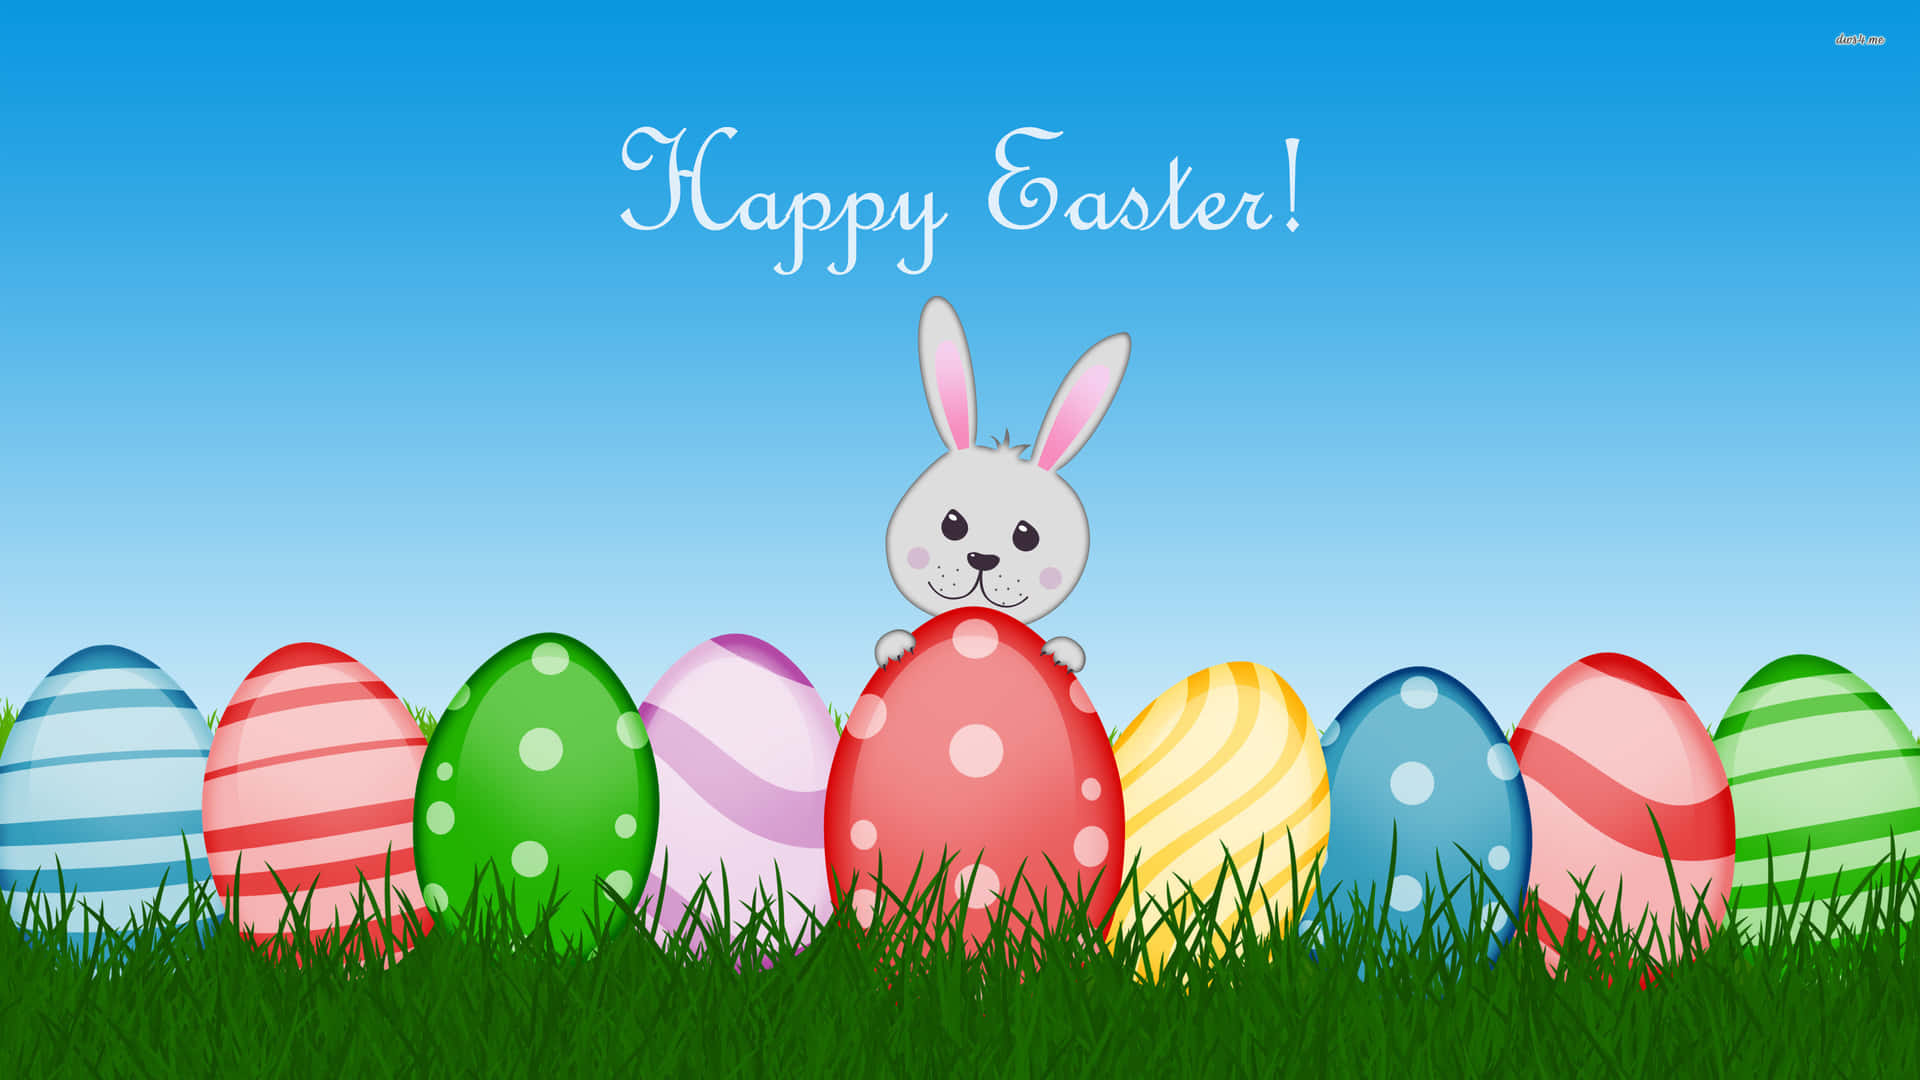 Celebrate this Easter with a cute and happy vibe! Wallpaper